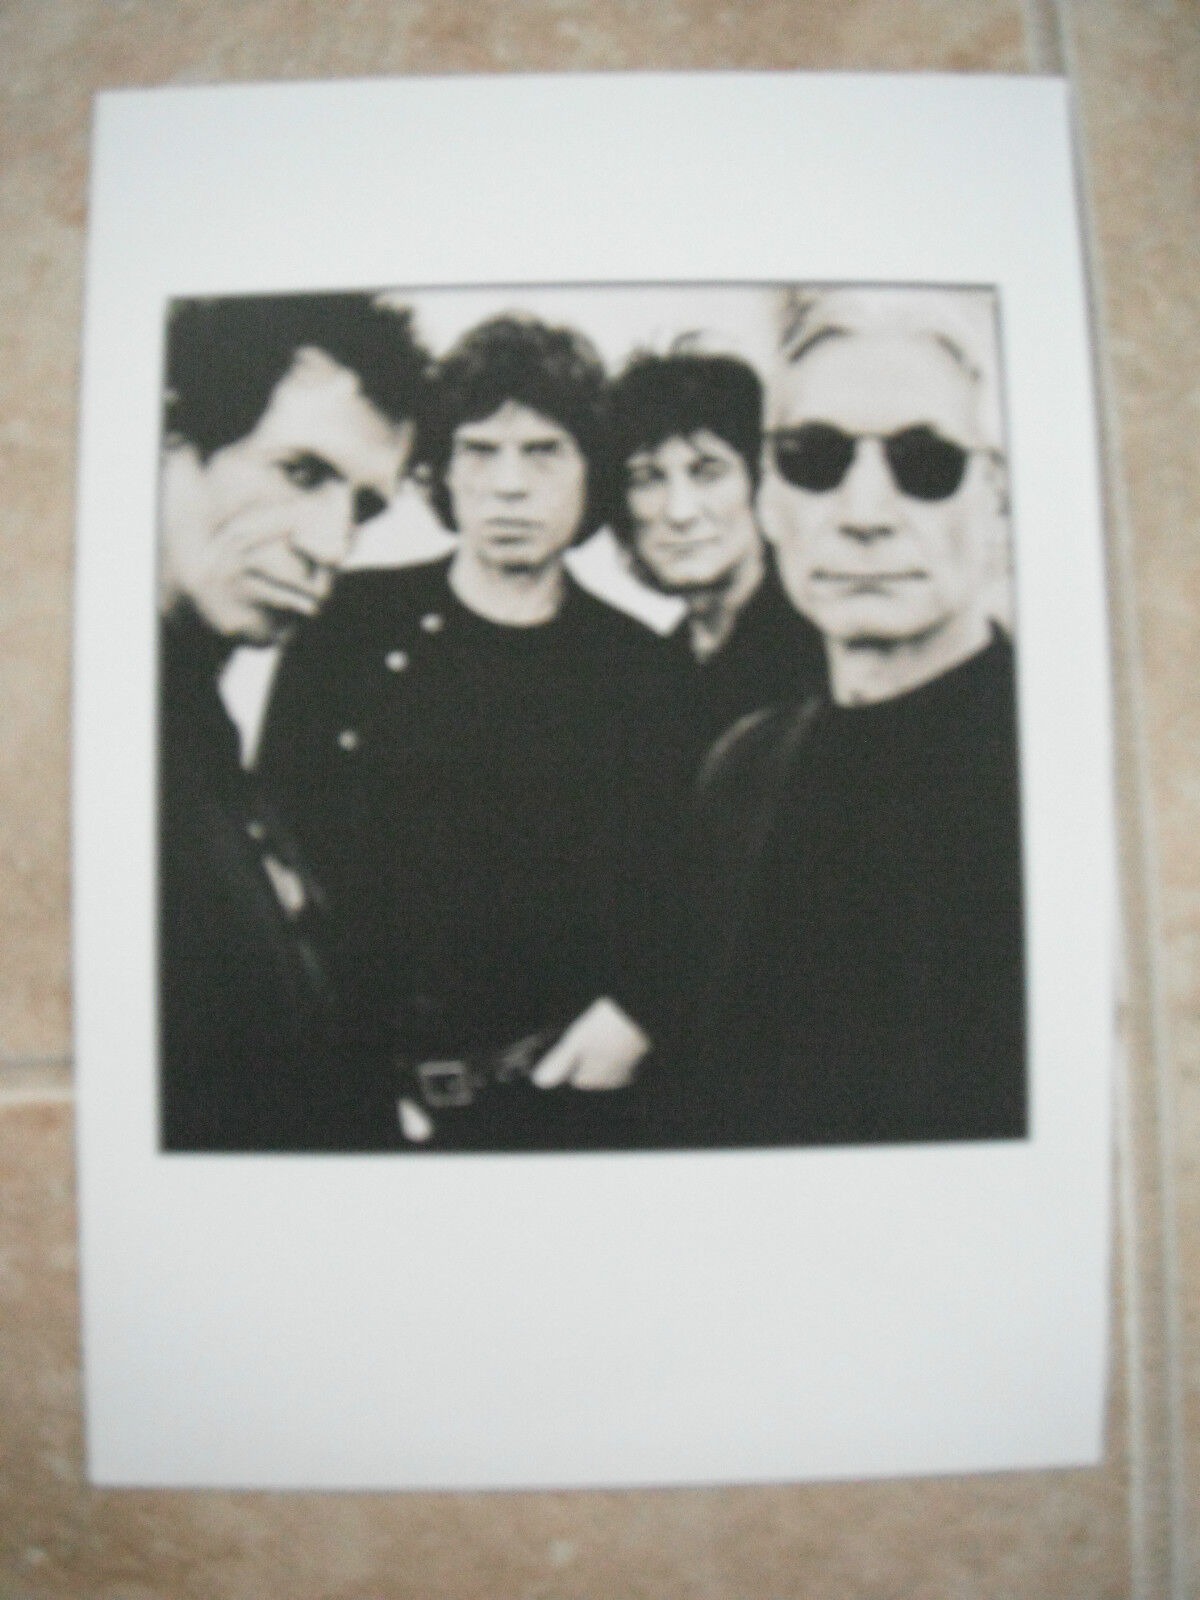 Rolling Stones Vtg Group Candid Coffee Table Book Photo Poster painting B&W